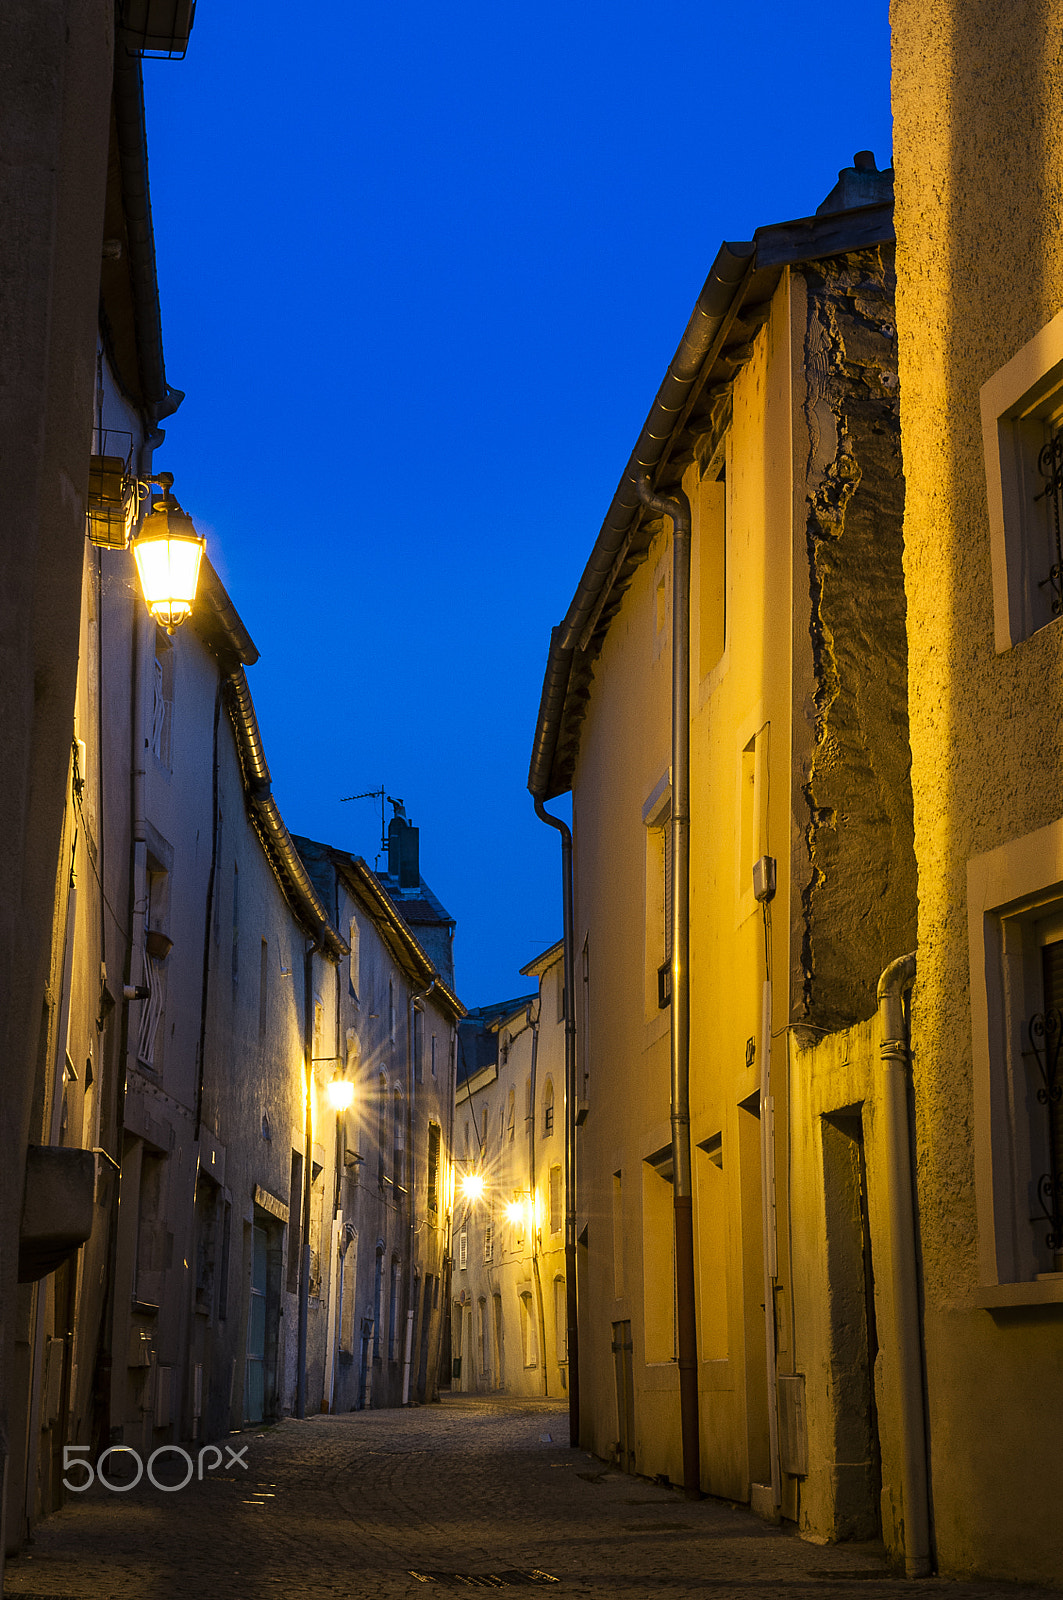 Nikon D300S sample photo. A side street during the blue hour, toul, france photography